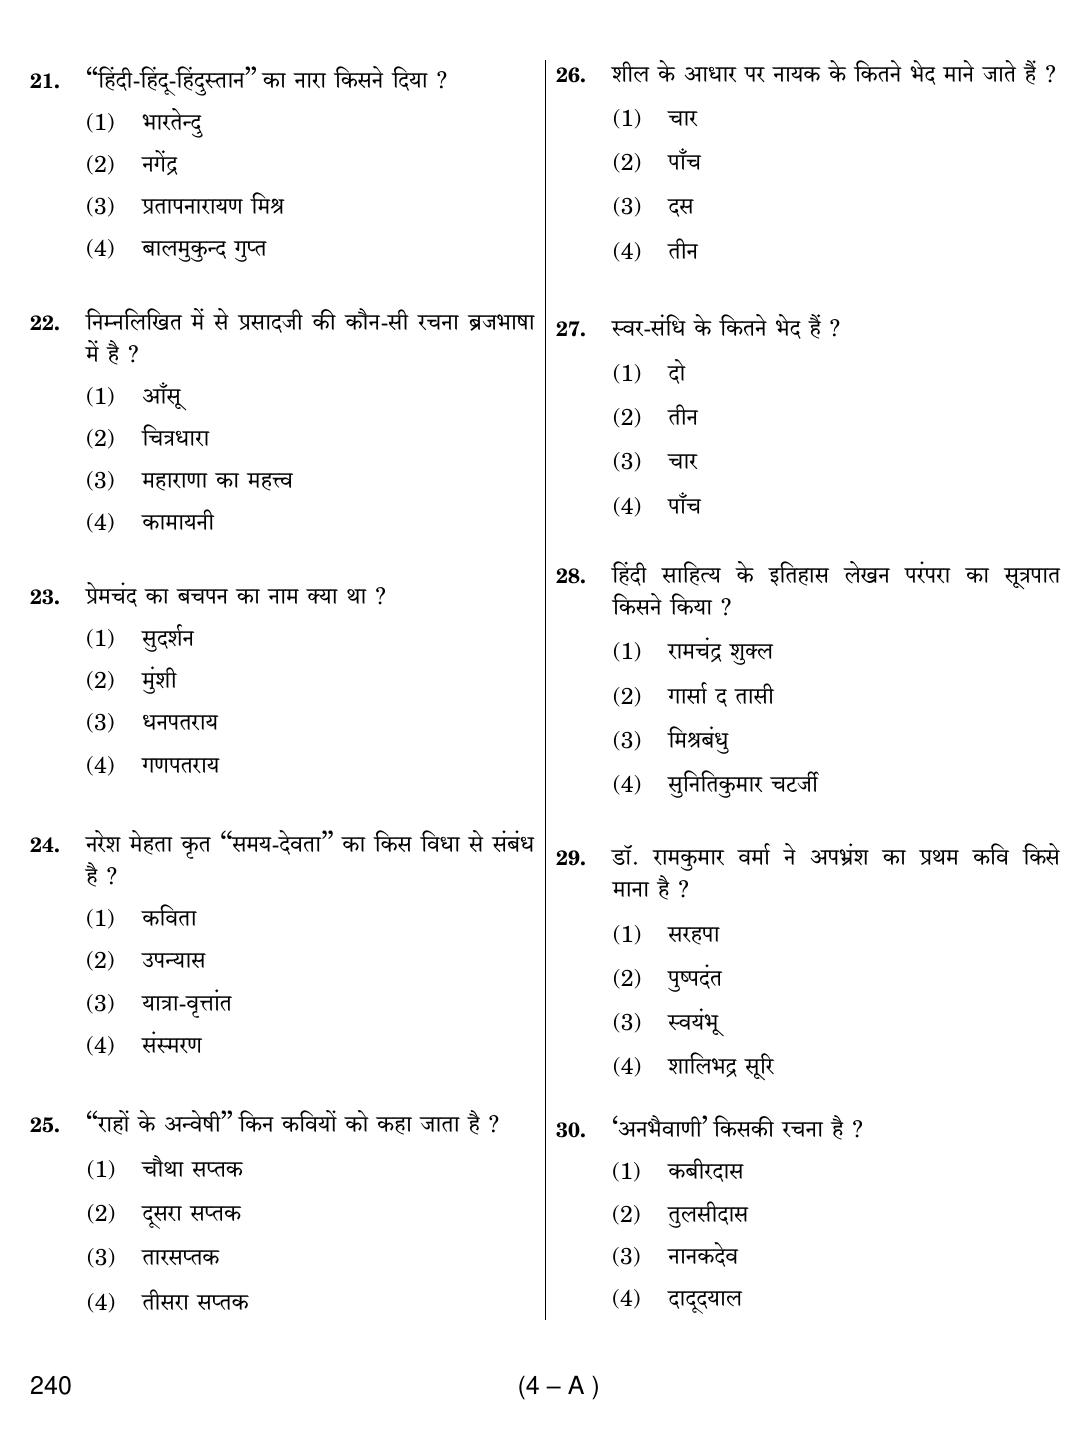 Punjab B.Ed Question Papers for Hindi Language - Page 4